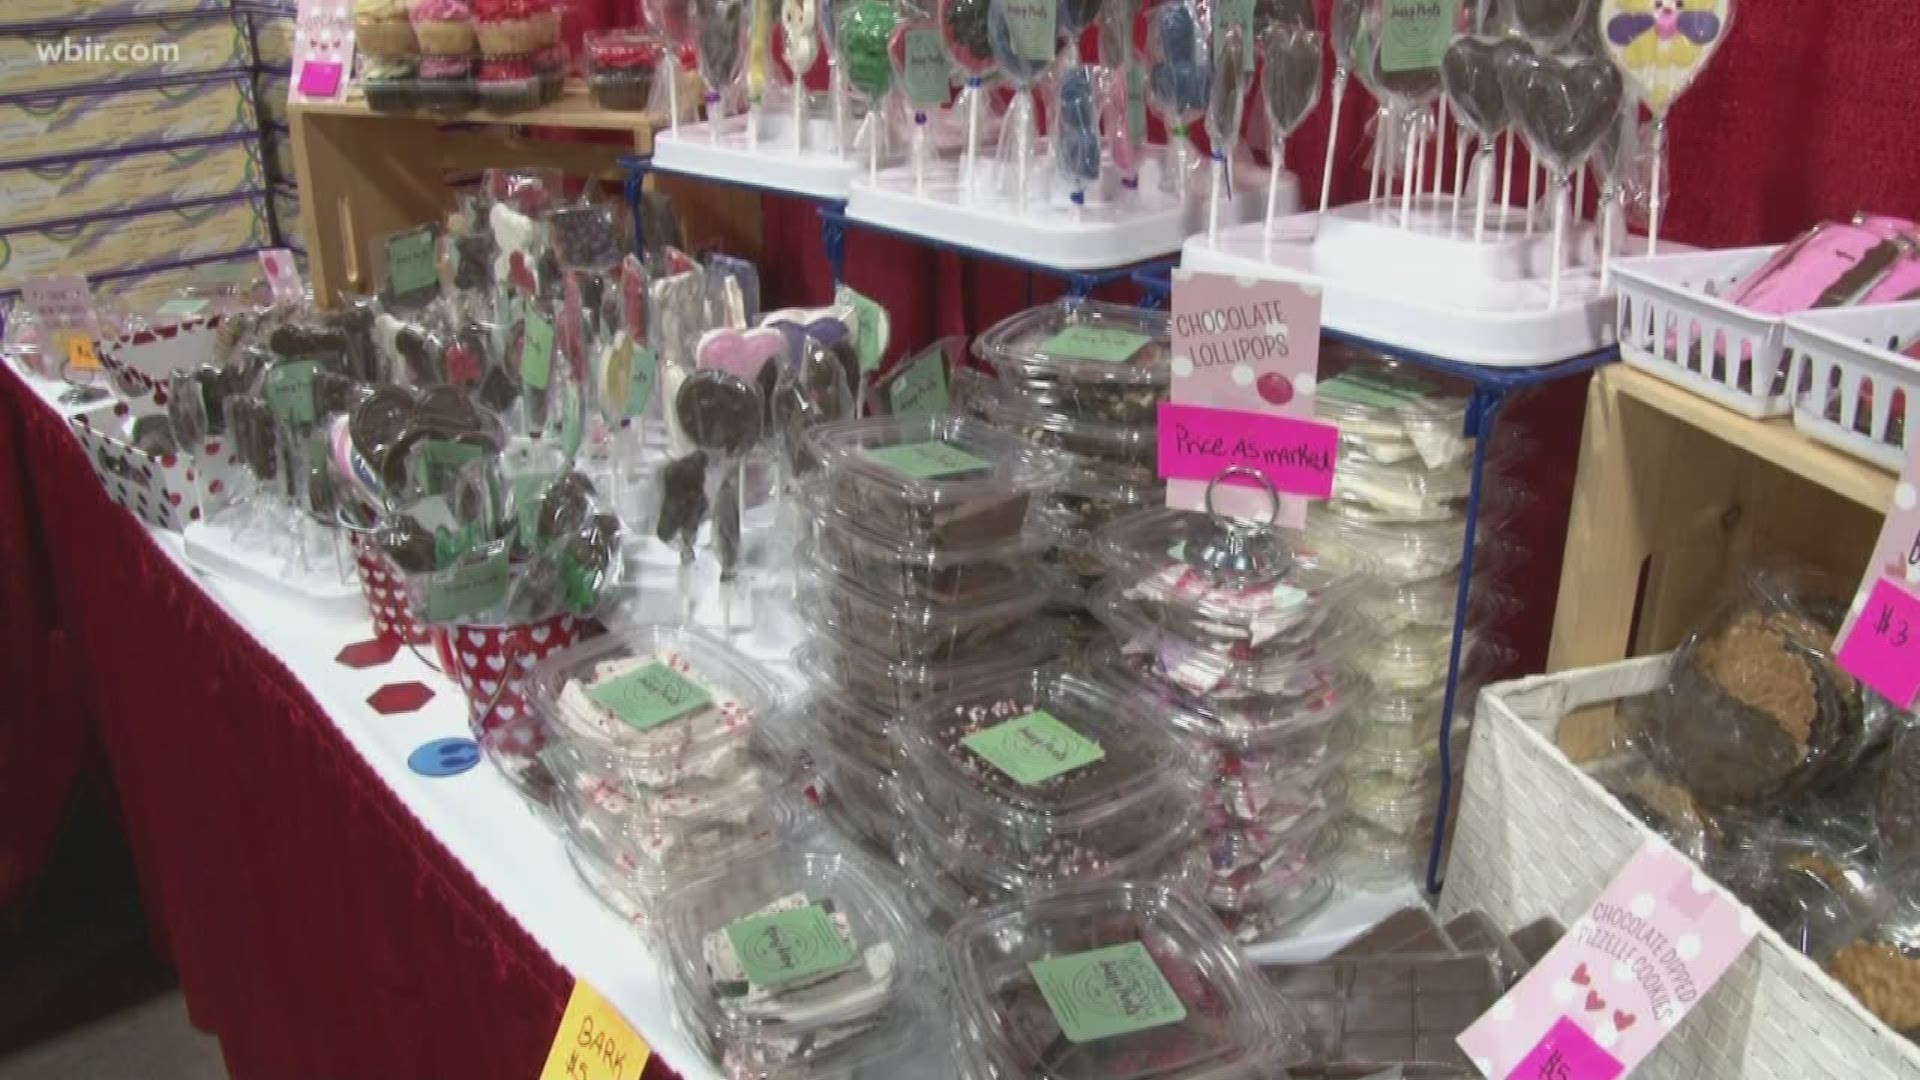 Saturday was Knoxville's sixth annual Chocolatefest. The tasty event benefits the Ronald McDonald House charities.